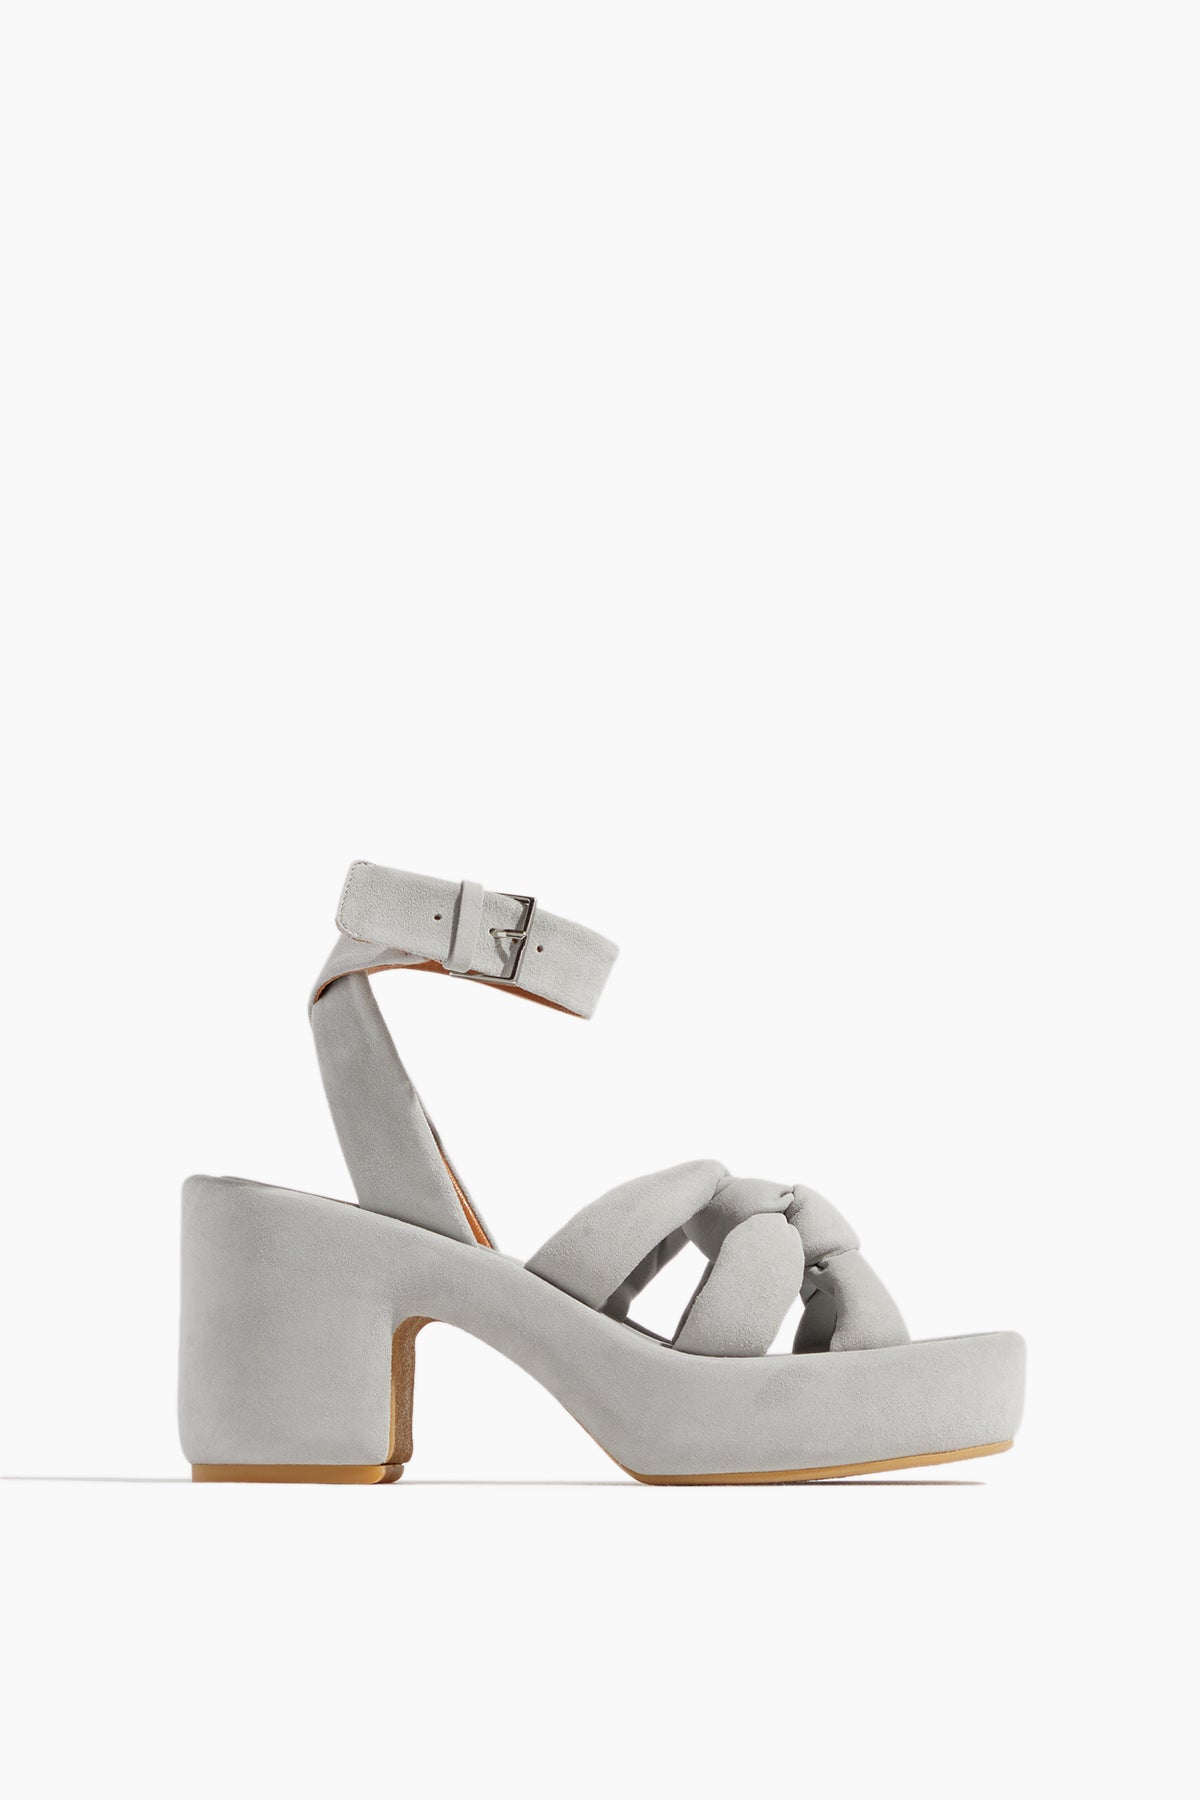 Clergerie Dayna Sandals in Grey - Grey - Size: 37.5 / 7 US